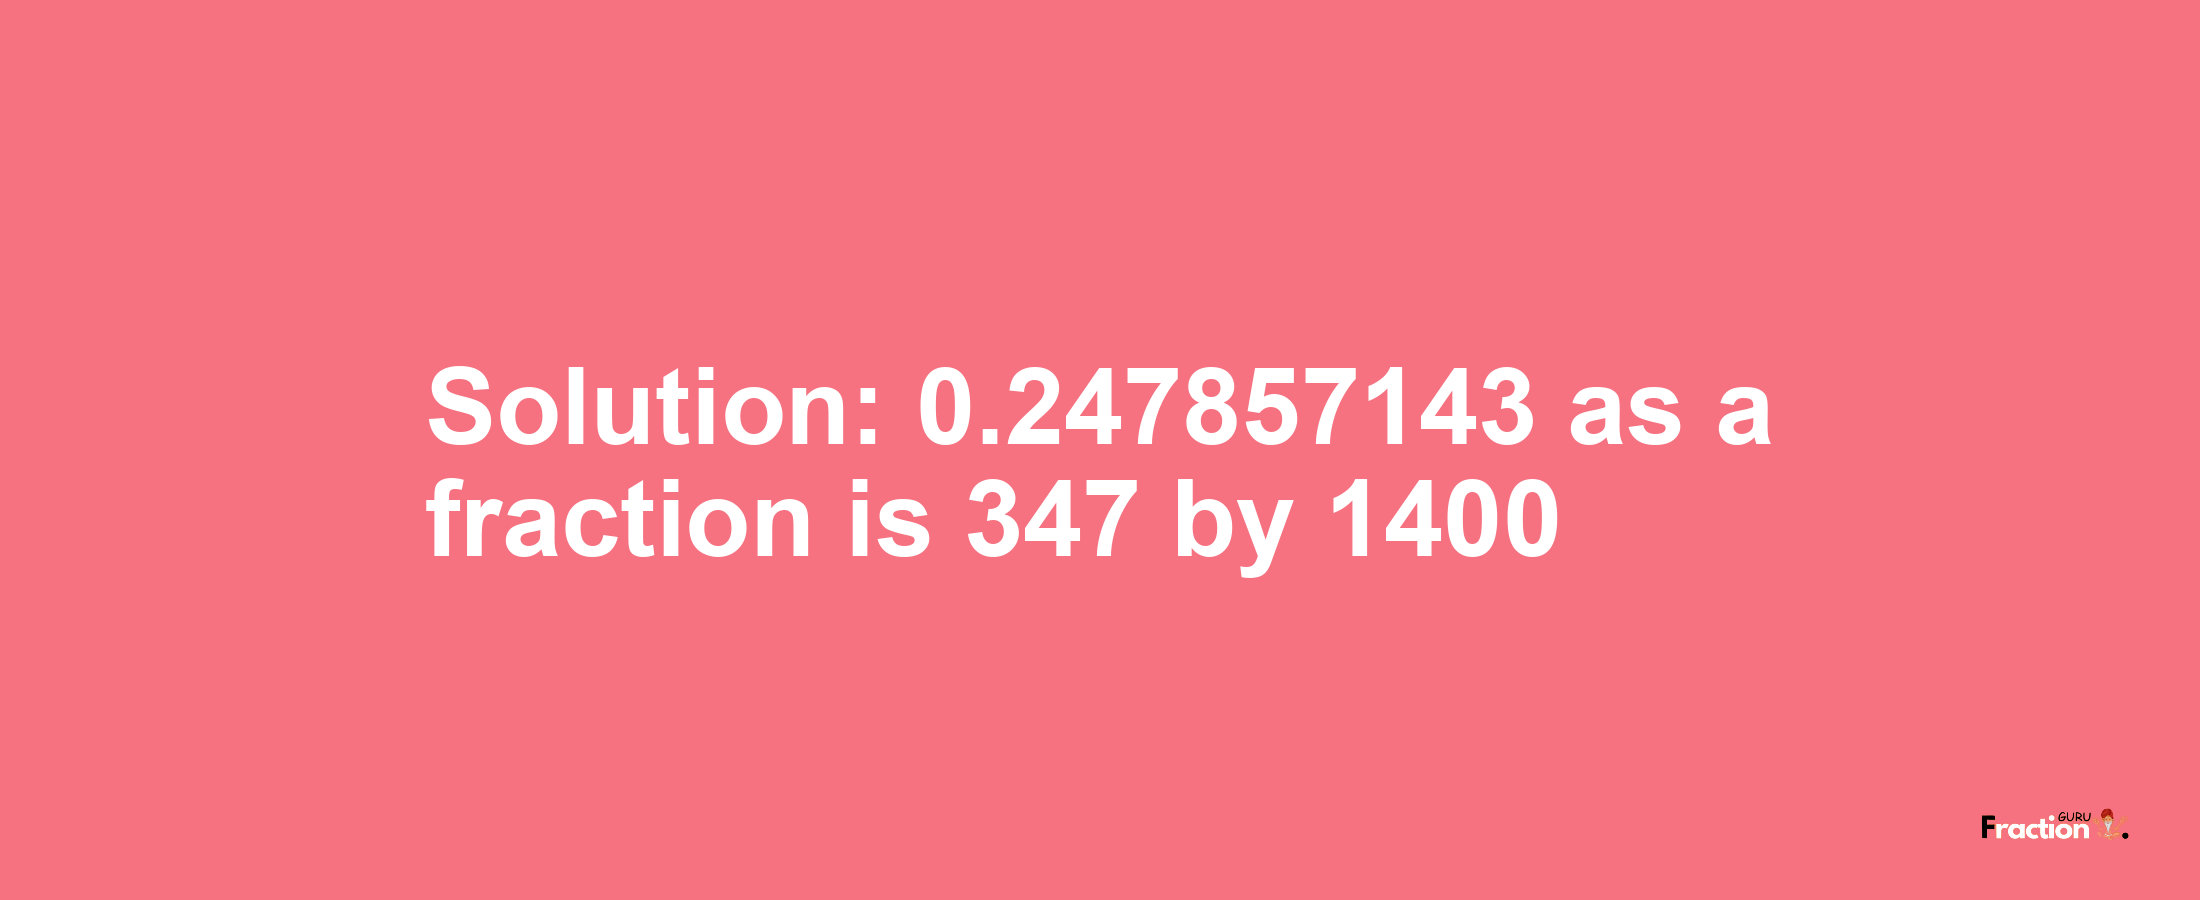 Solution:0.247857143 as a fraction is 347/1400